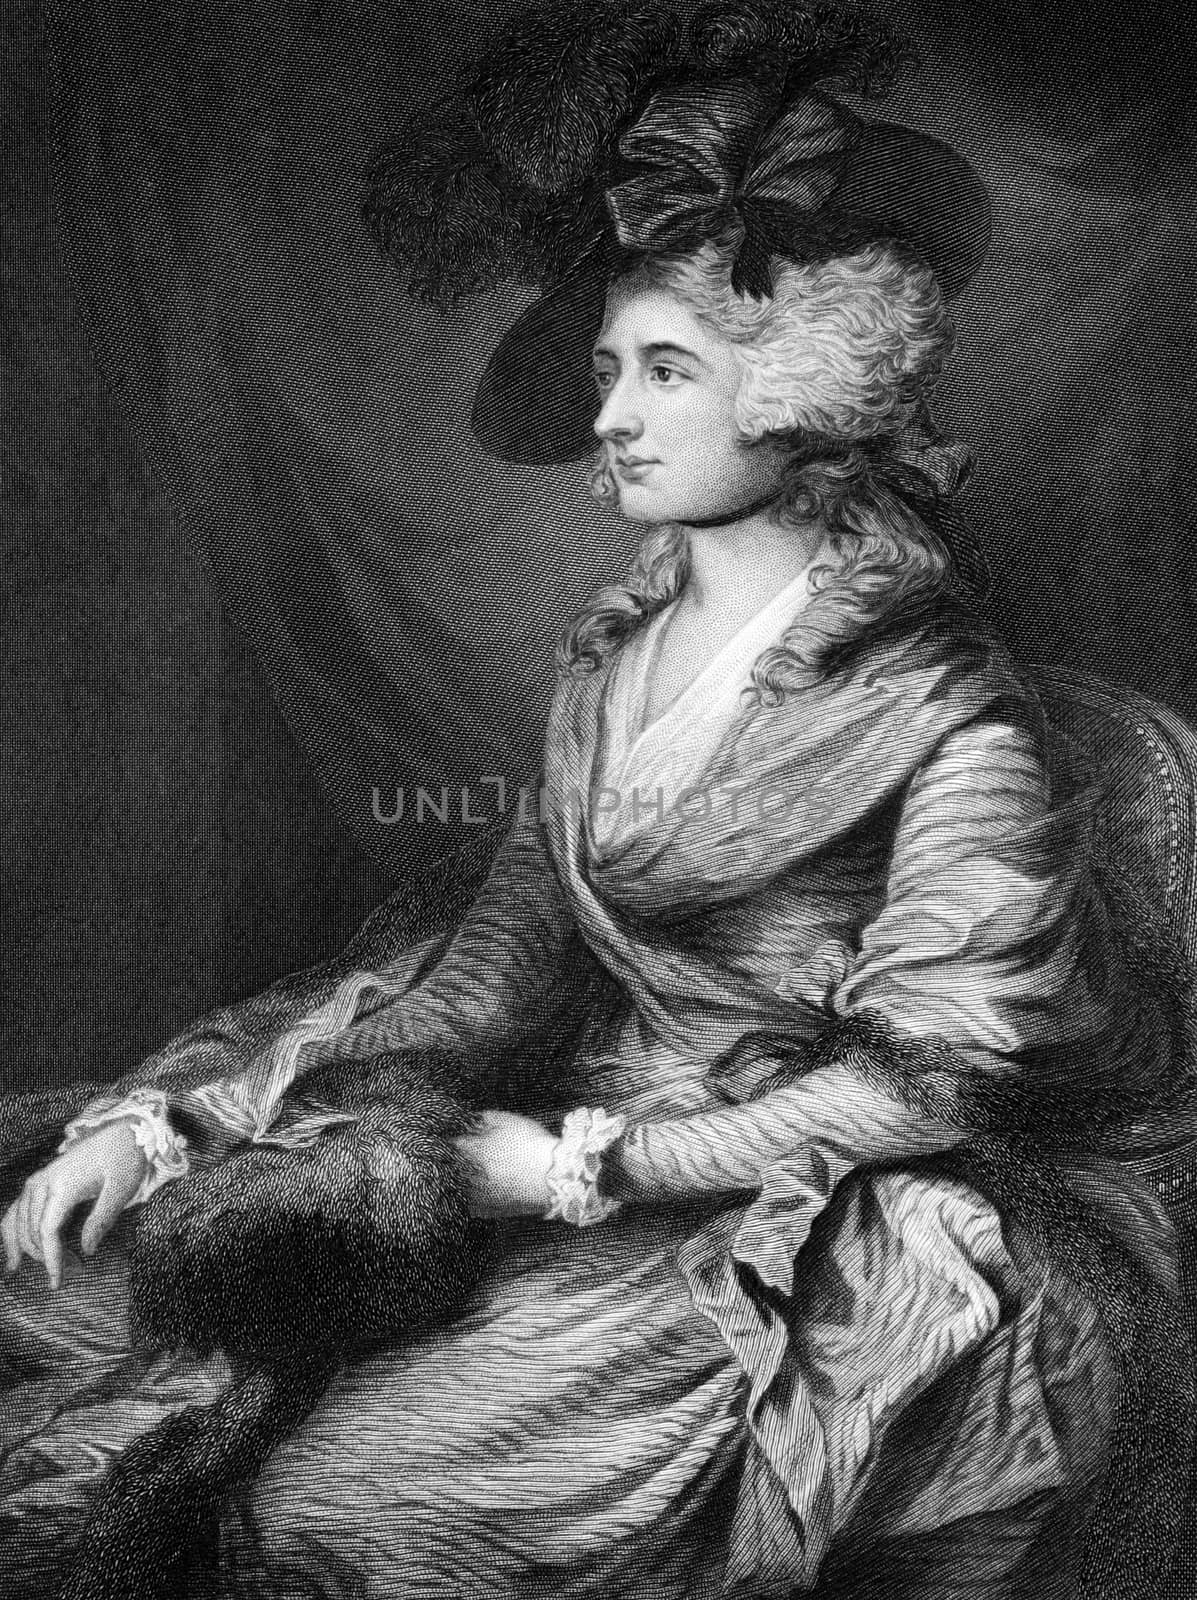 Sarah Siddons (1755-1831) on engraving from 1873. British actress, most famous 18th century tragedienne. Engraved by unknown artist and published in ''Portrait Gallery of Eminent Men and Women with Biographies'',USA,1873.